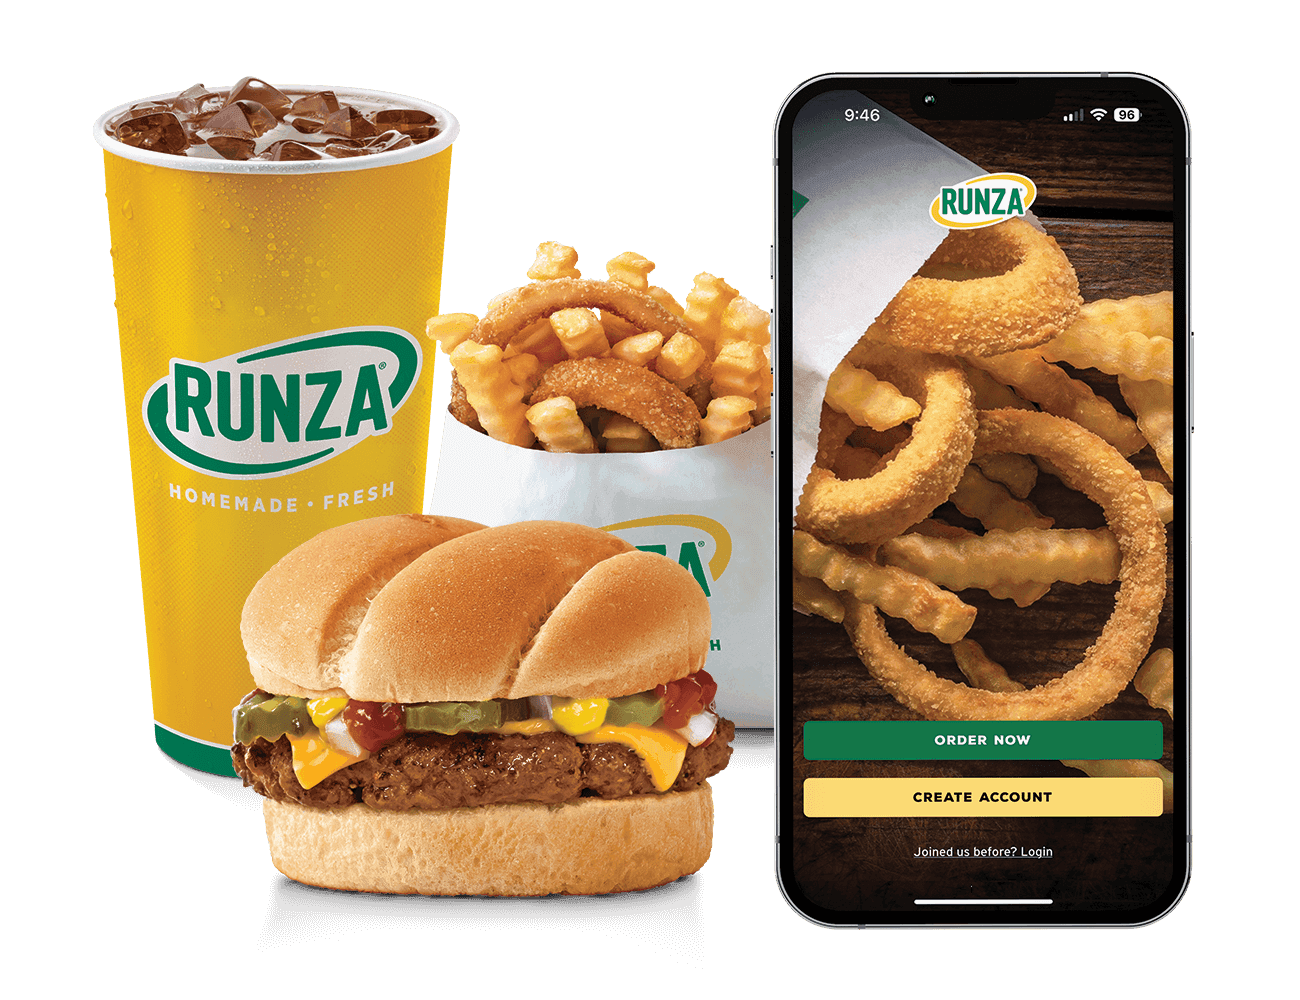 Mobile app screenshot with burger, fries, and drink